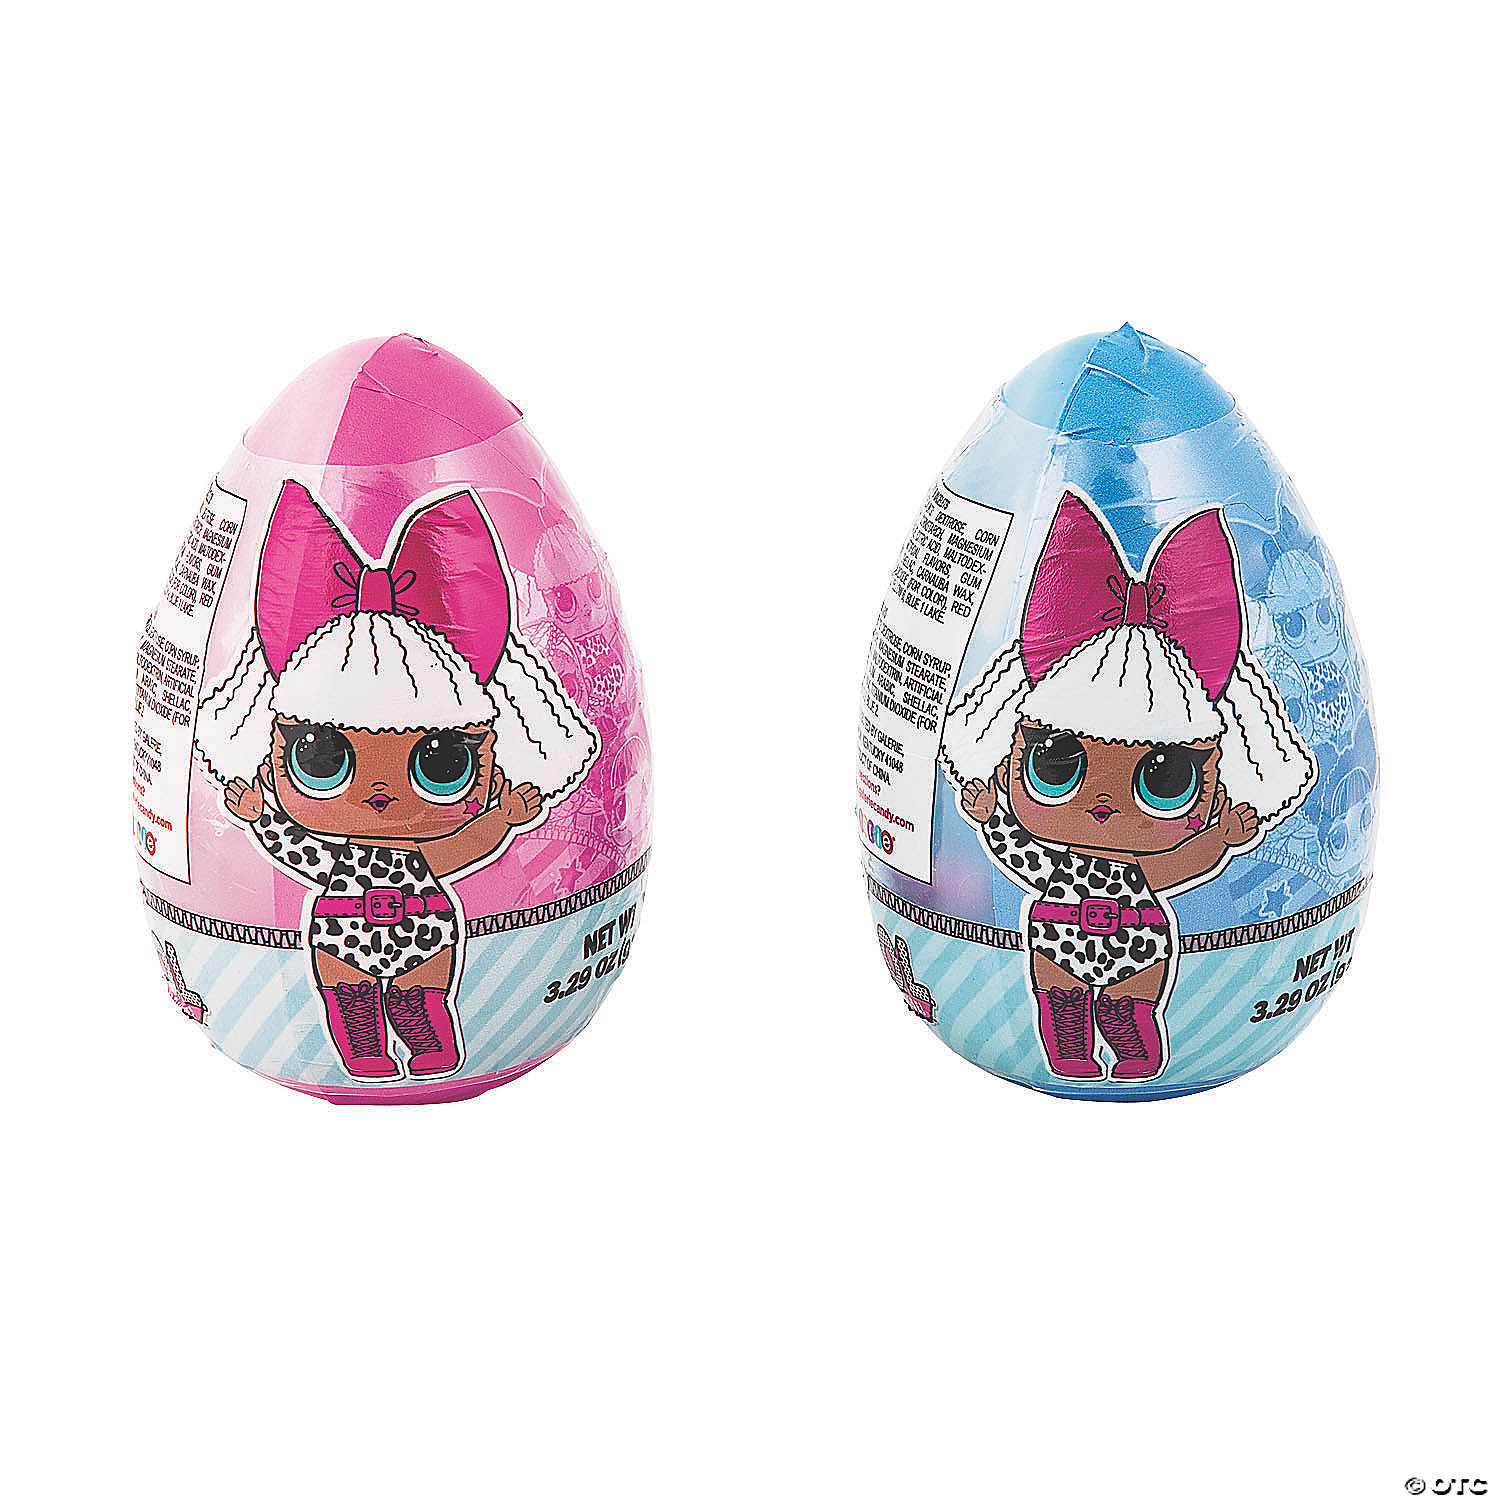 Jumbo L O L Surprise Candy Filled Plastic Easter Egg 1 Pc Oriental Trading